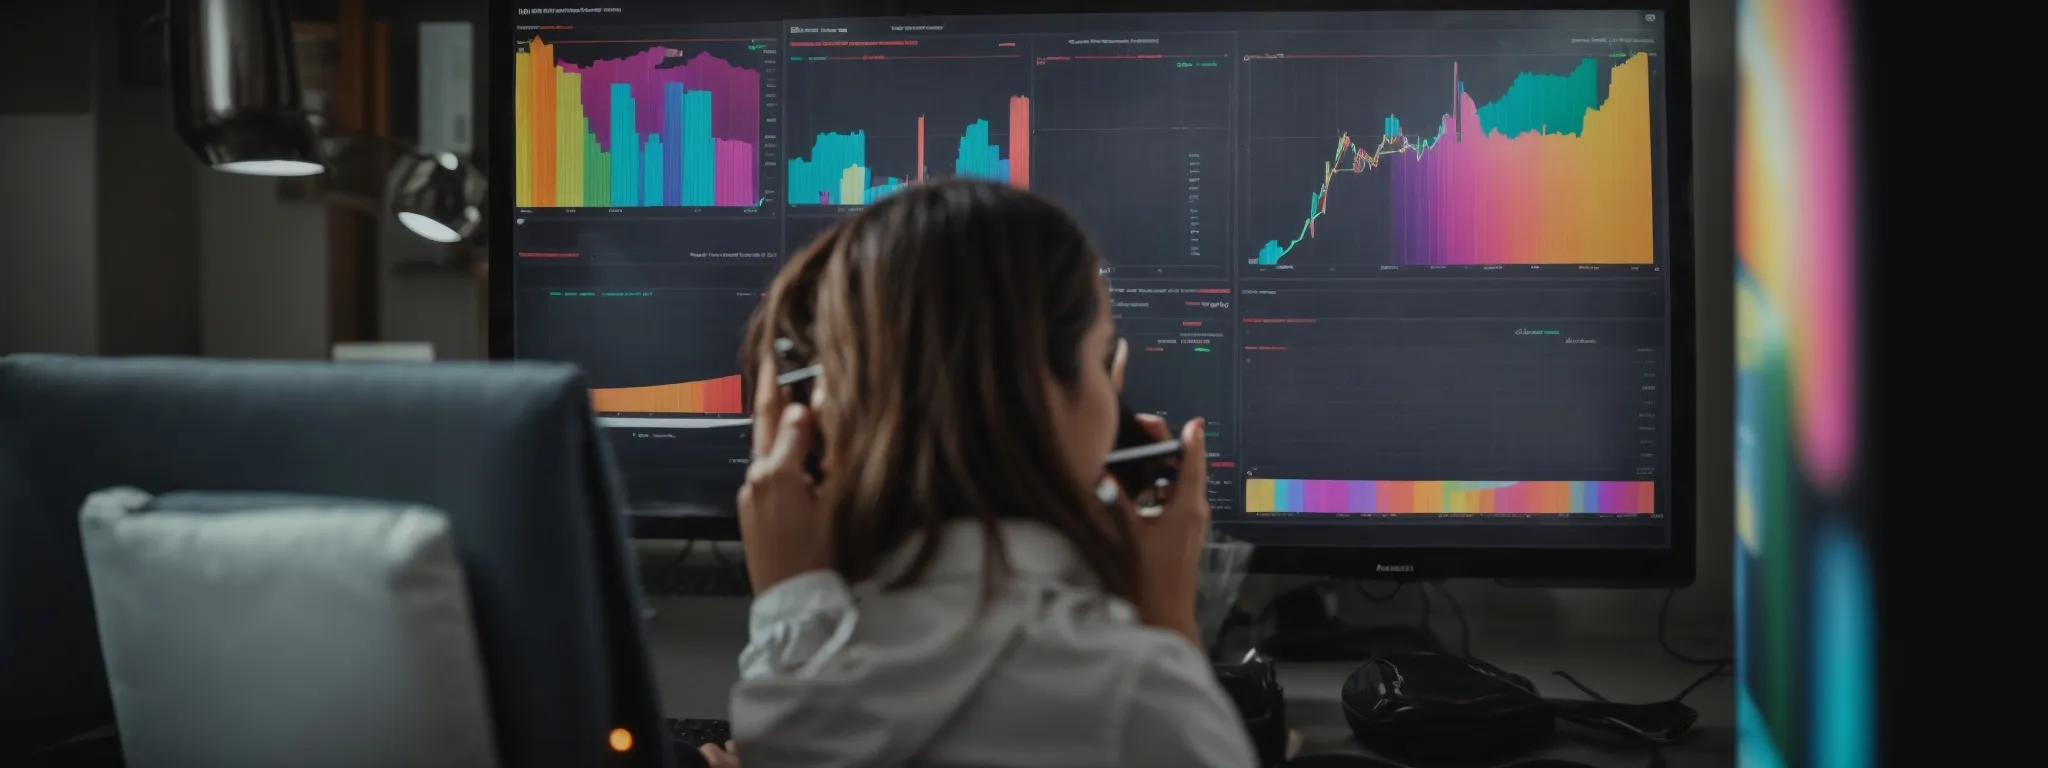 a business owner reviews a colorful analytics dashboard on her computer, reflecting a focus on local seo optimization.